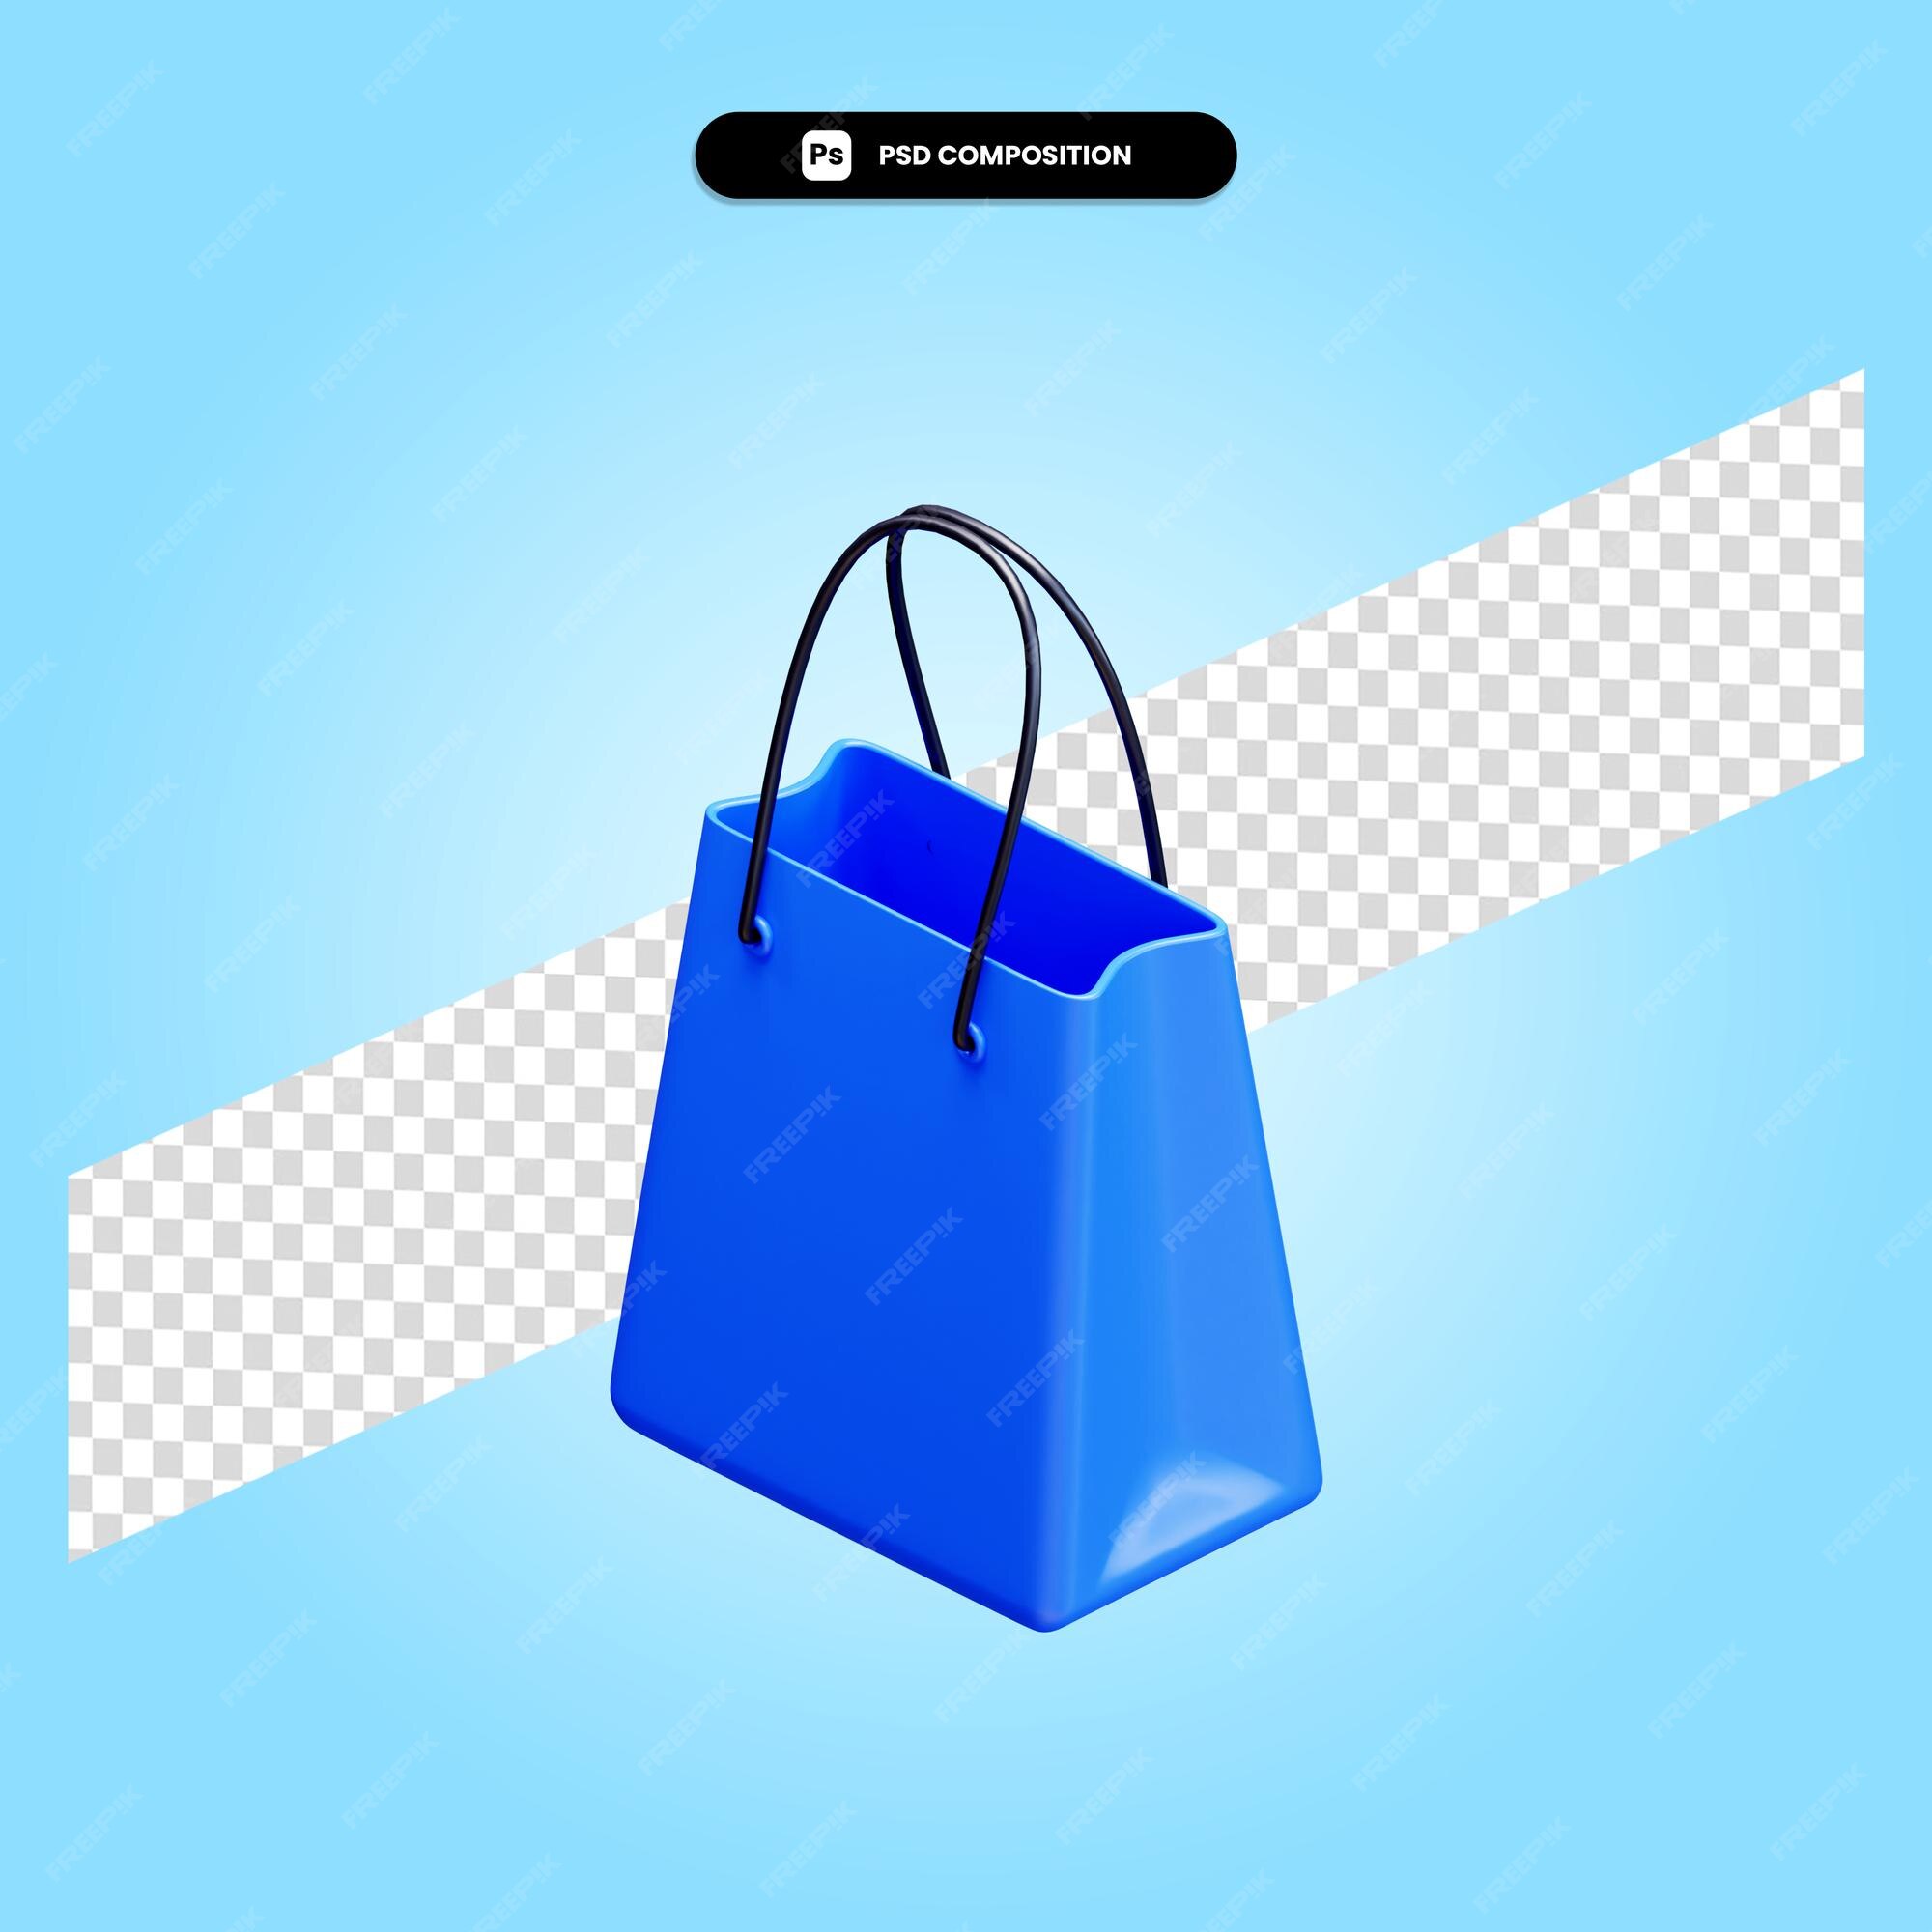 Premium PSD  Shopping bags on a transparent background 3d rendering